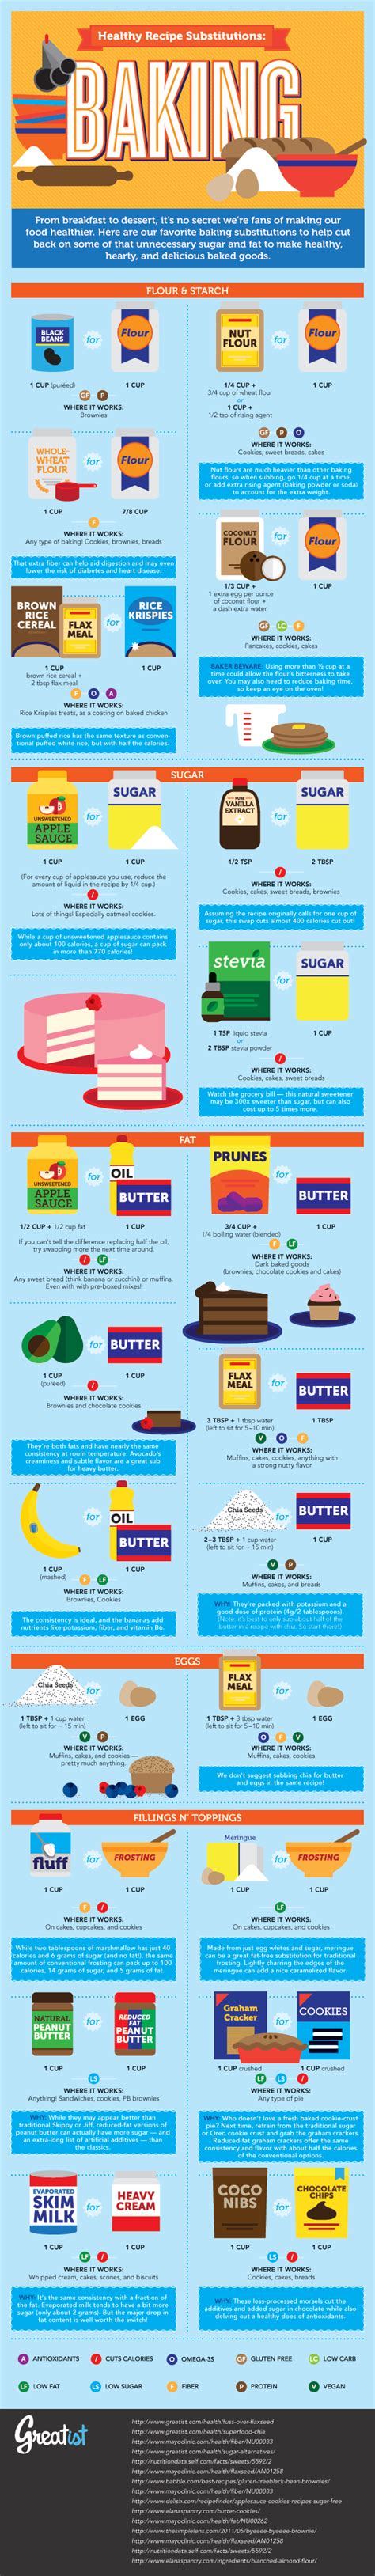 Cakes, bakes and fruit dishes. Healthy Baking Ingredients - Food Infographic